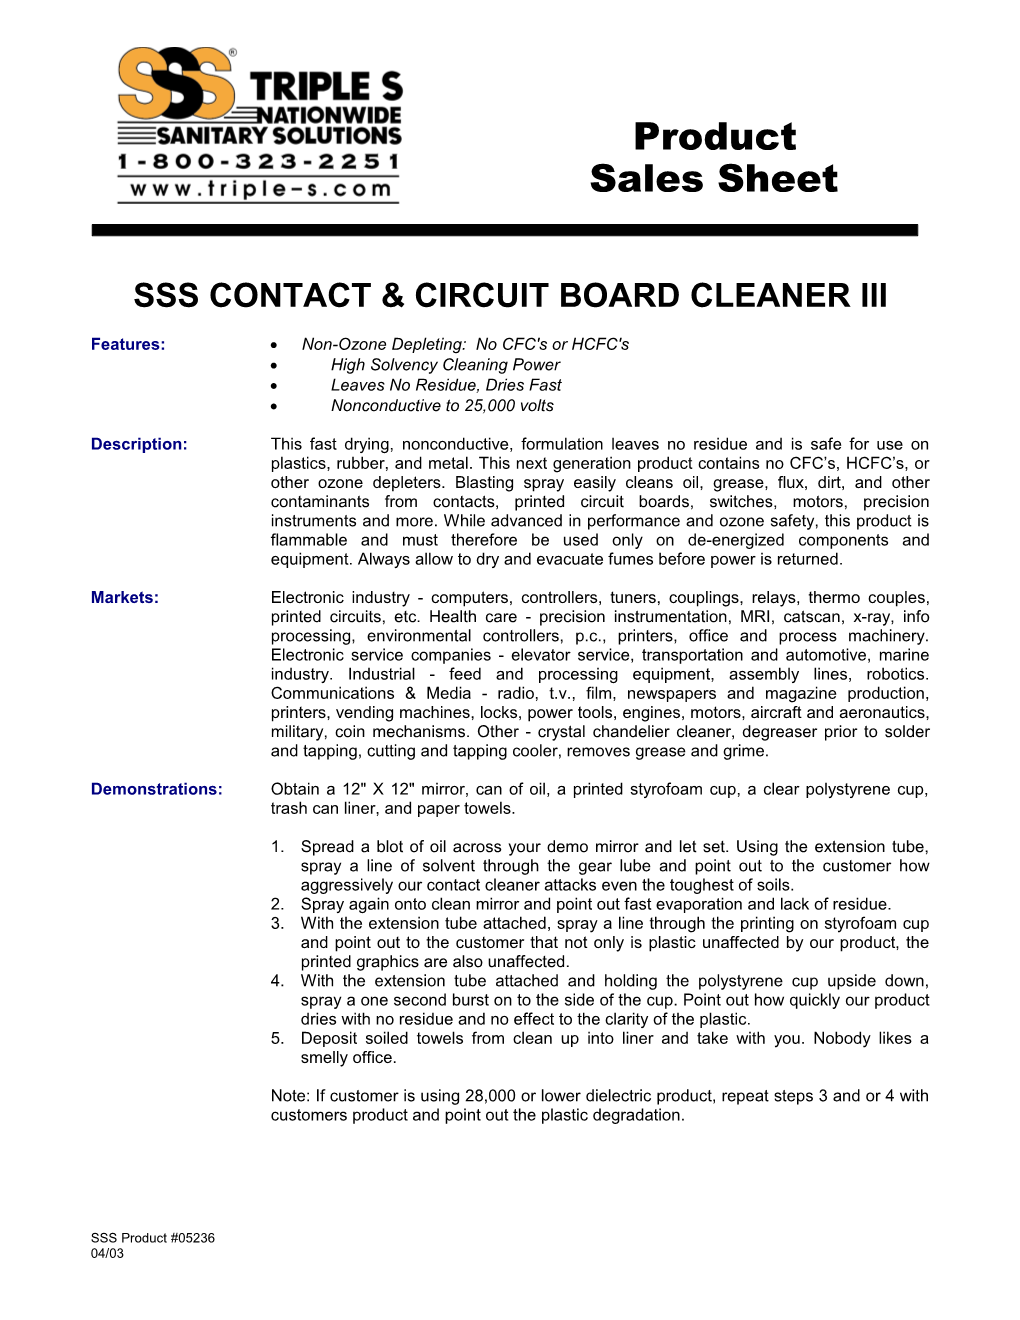 Sss Contact & Circuit Board Cleaner Iii